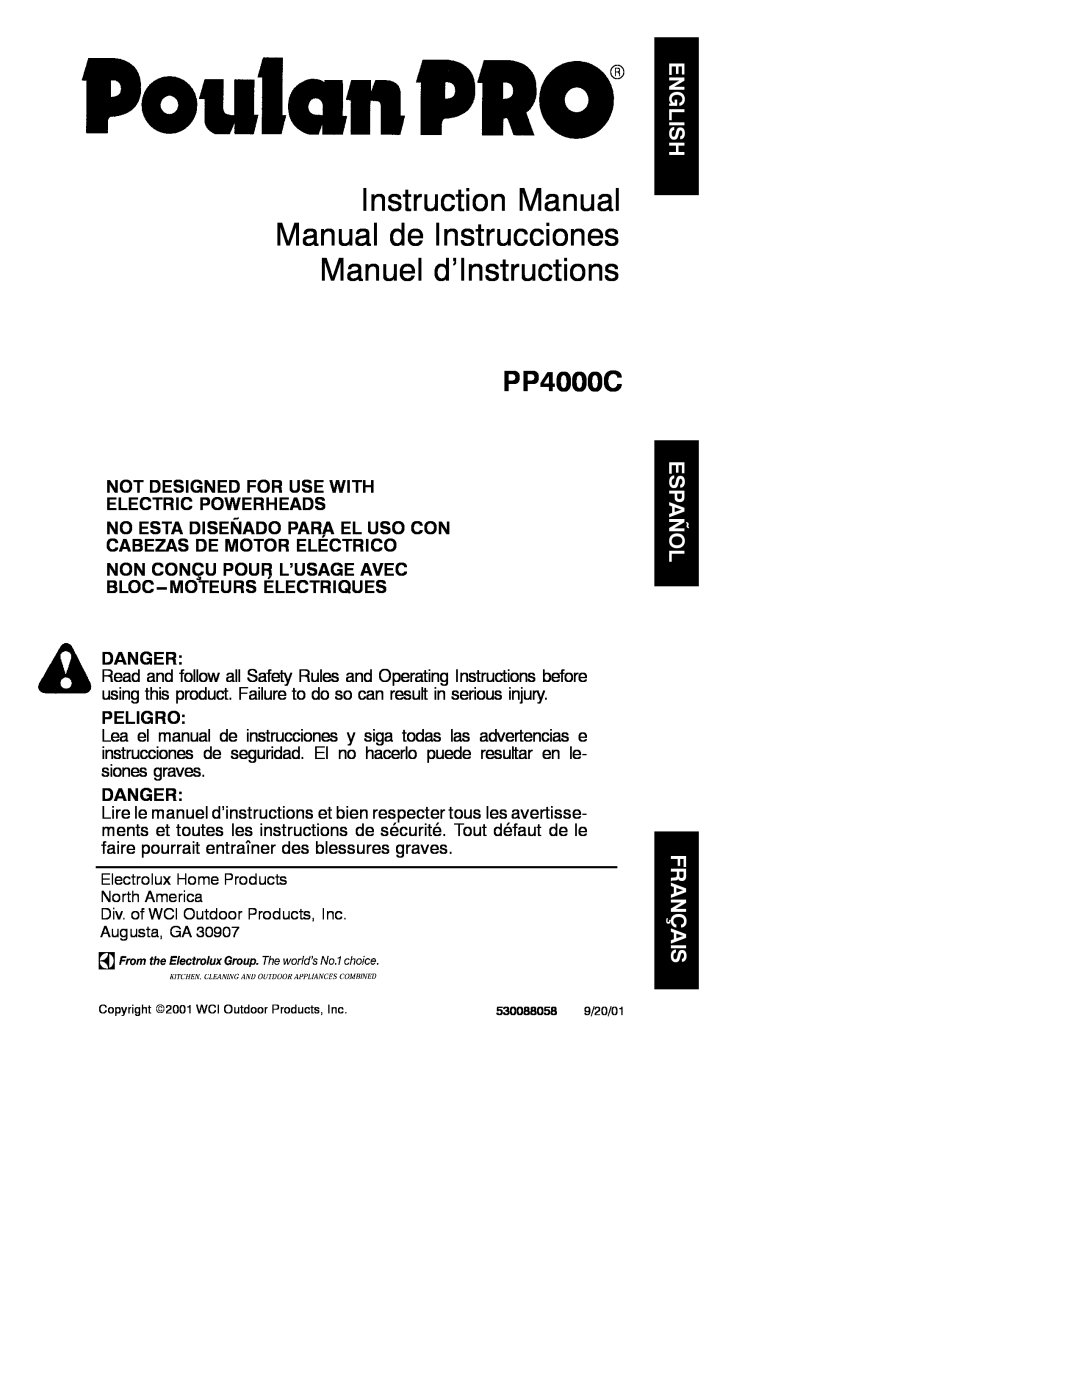 Poulan PP4000C instruction manual Danger, Peligro, Manuel d’Instructions, Not Designed For Use With Electric Powerheads 